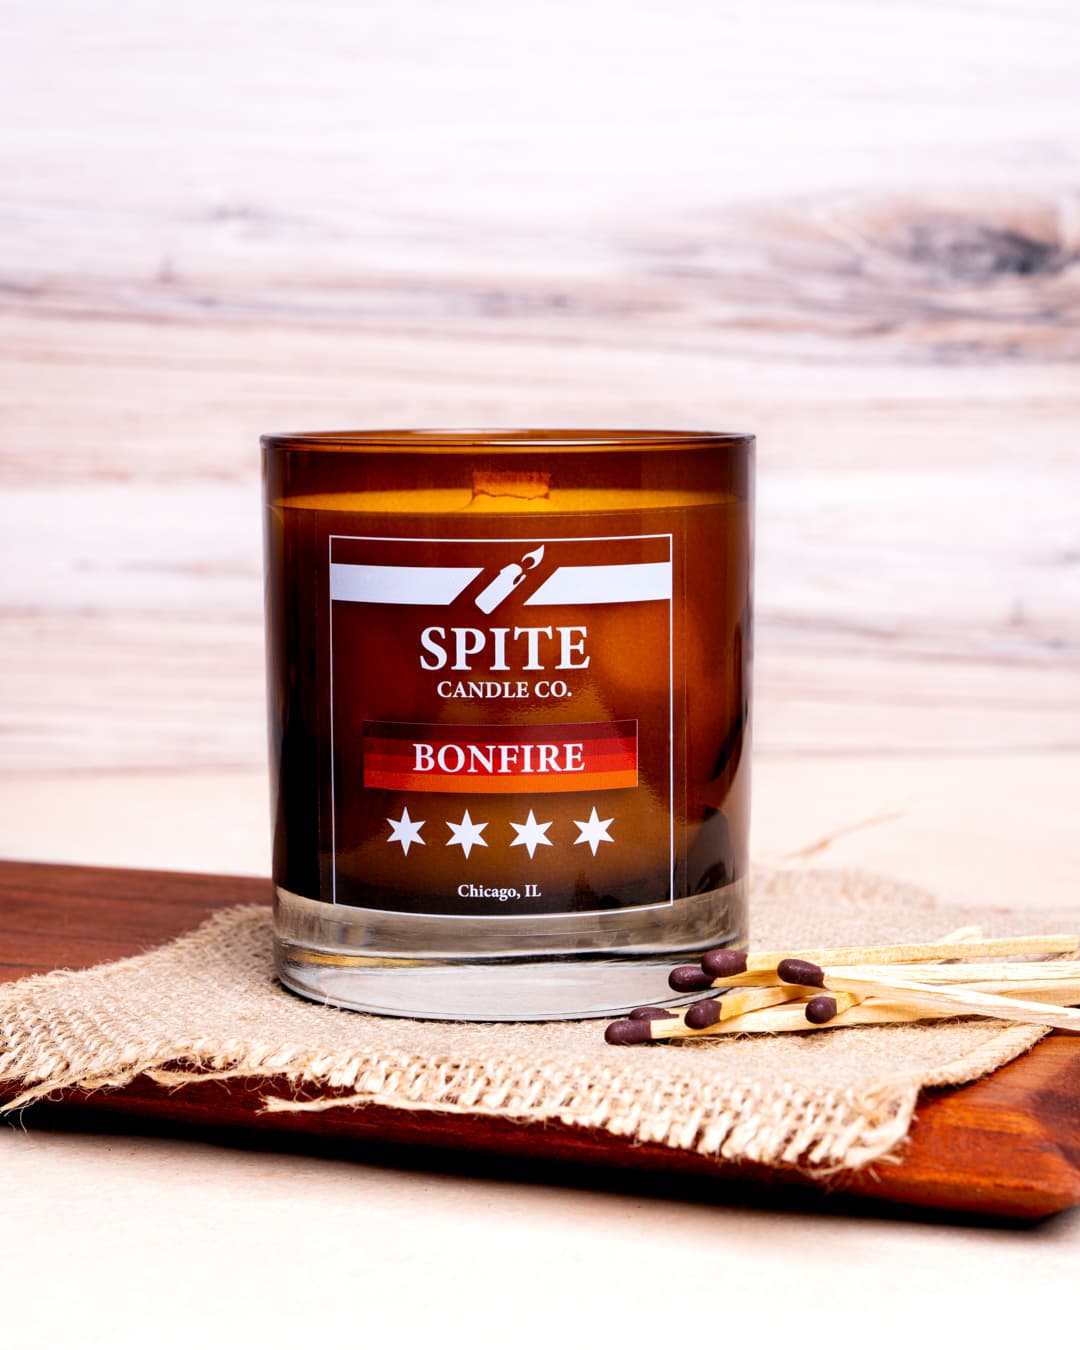 Spite Candle Company Bonfire Candle with Matches Blank Meme Template